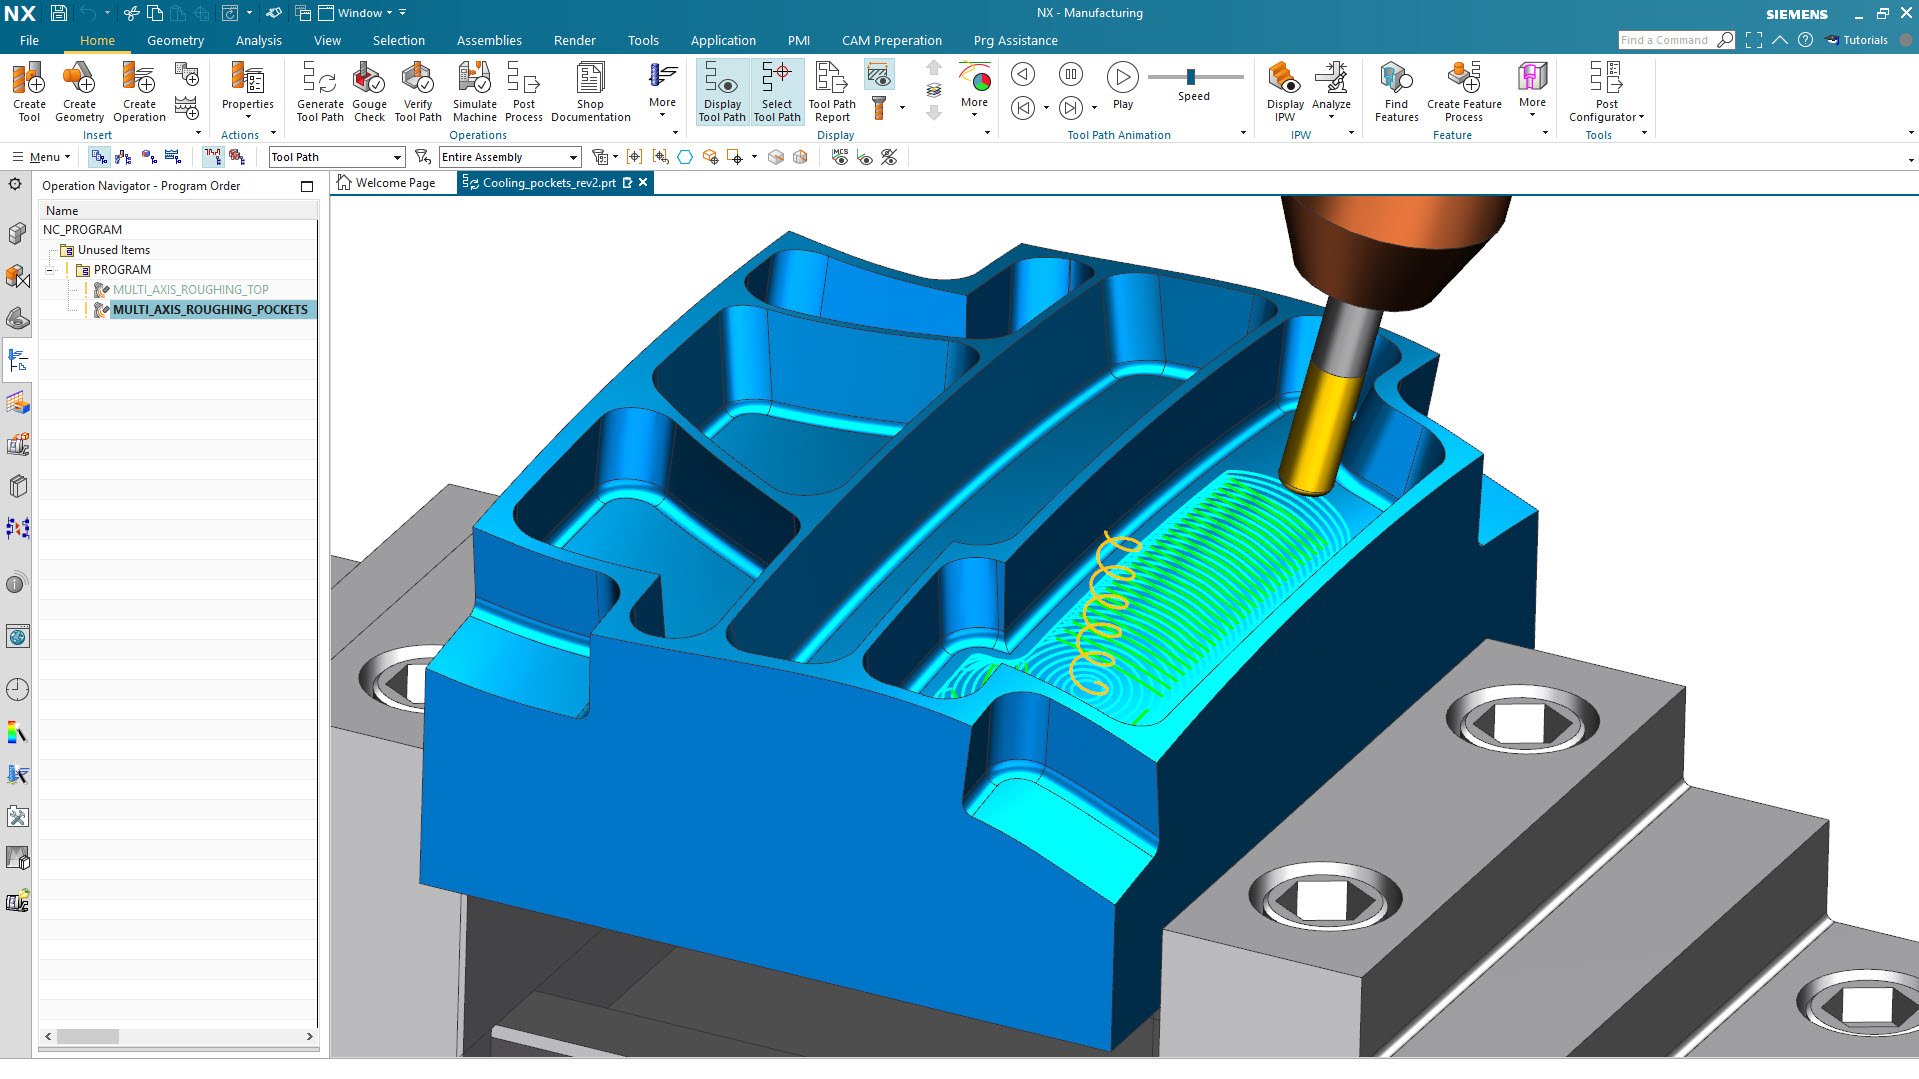 Create precisely controlled 5-axis tool paths to effectively machine complex geometries. Using application-specific capabilities, you can dramatically reduce programming time and create smart, collision-free cutting operations.